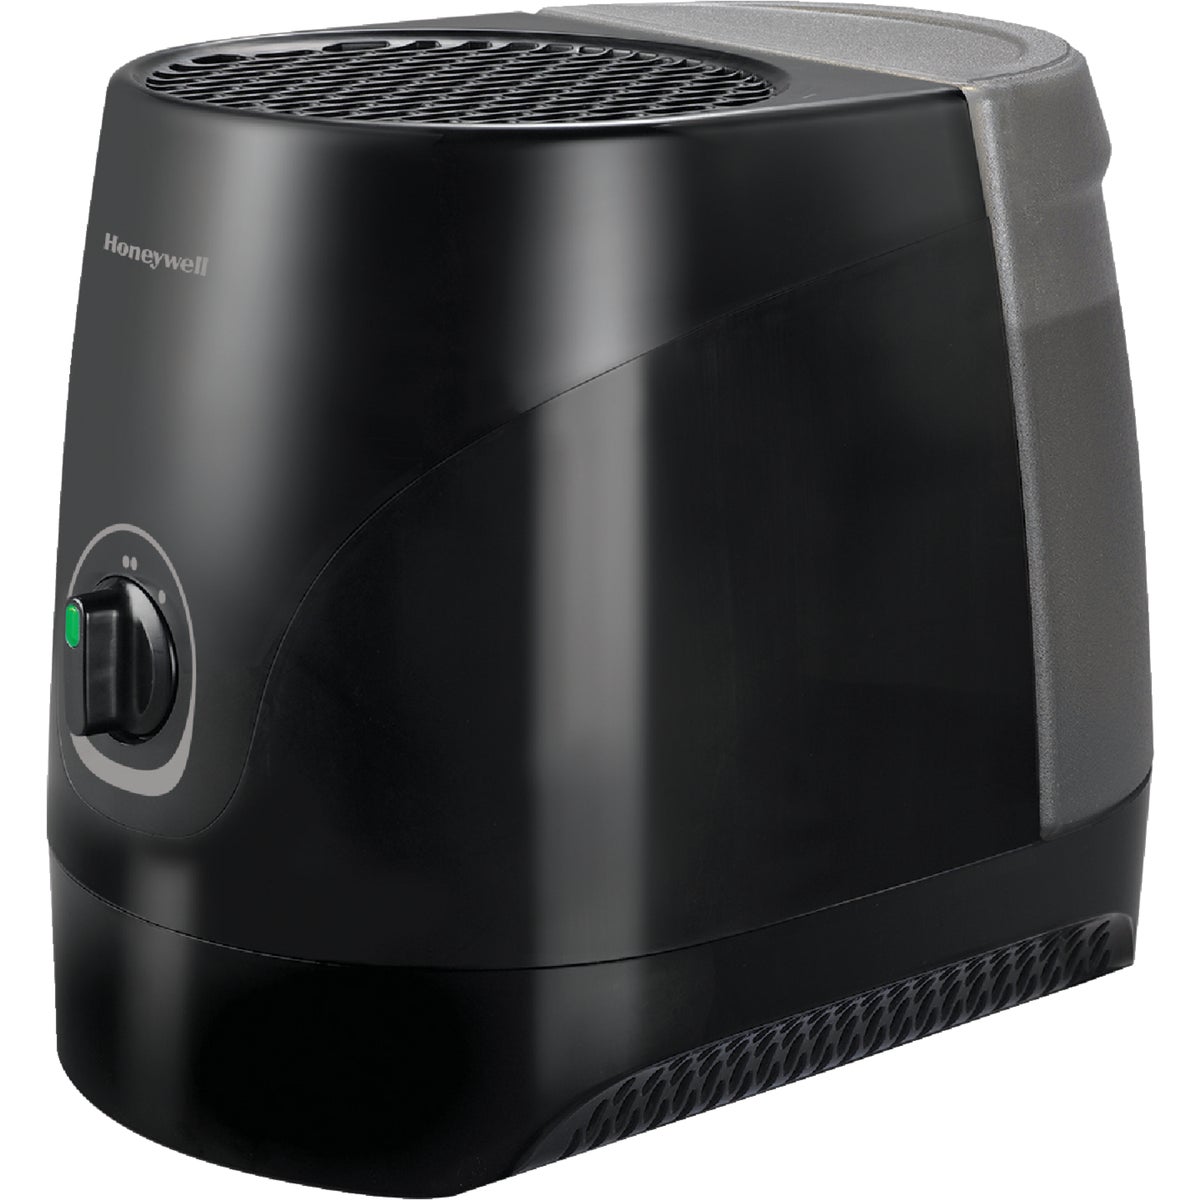 Item 559156, Cool moisture humidifier with stylish design and quiet operation.